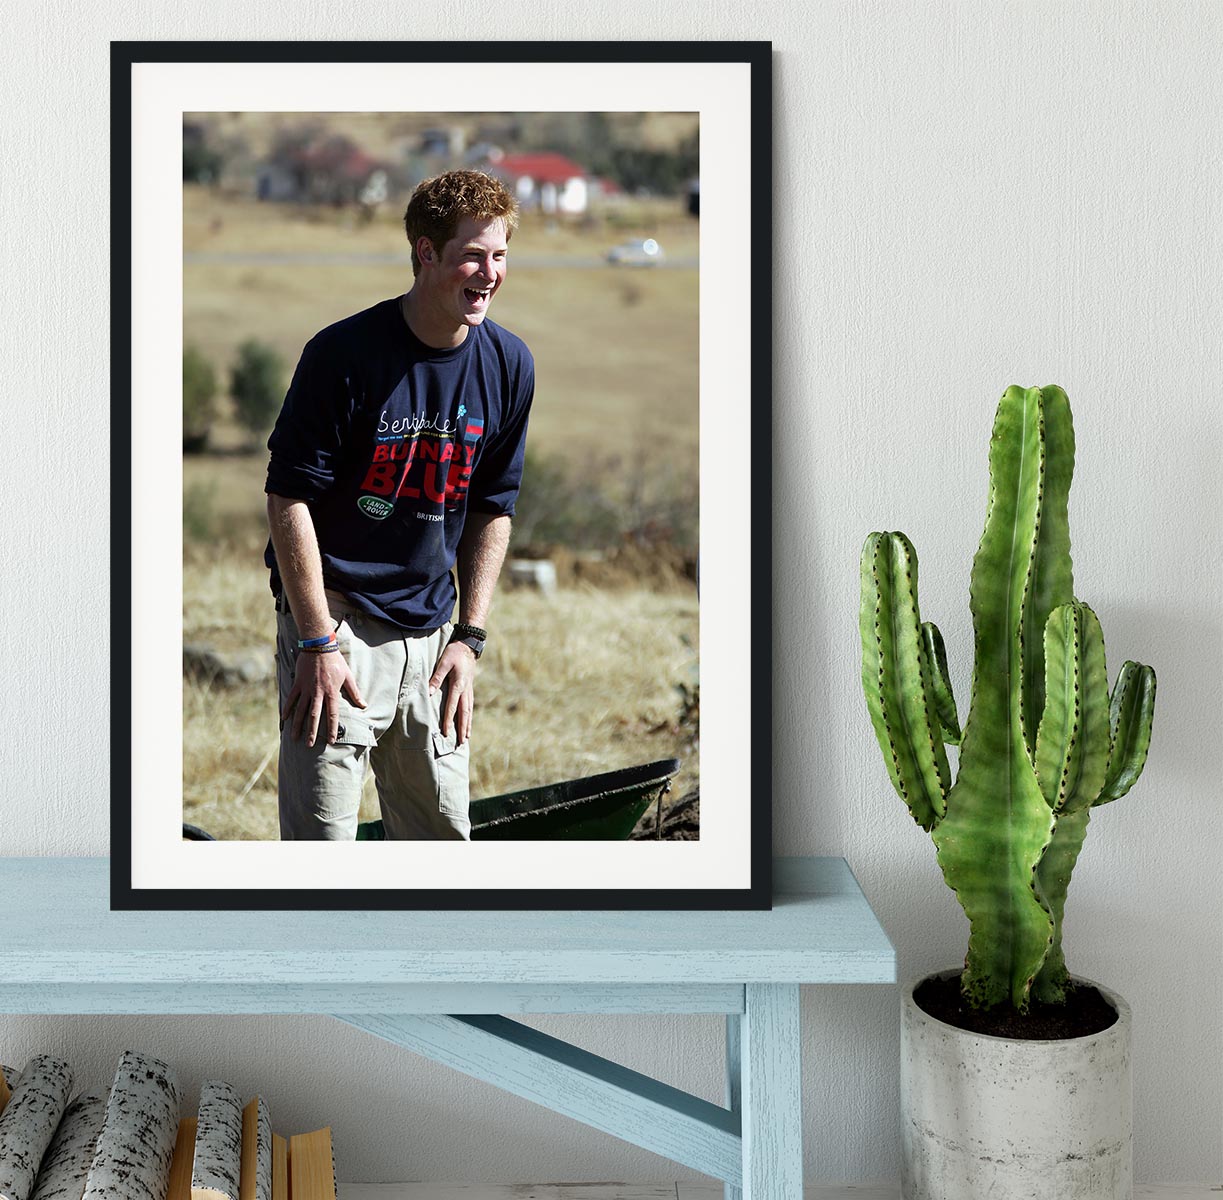 Prince Harry helping build a school in Lesotho South Africa Framed Print - Canvas Art Rocks - 1